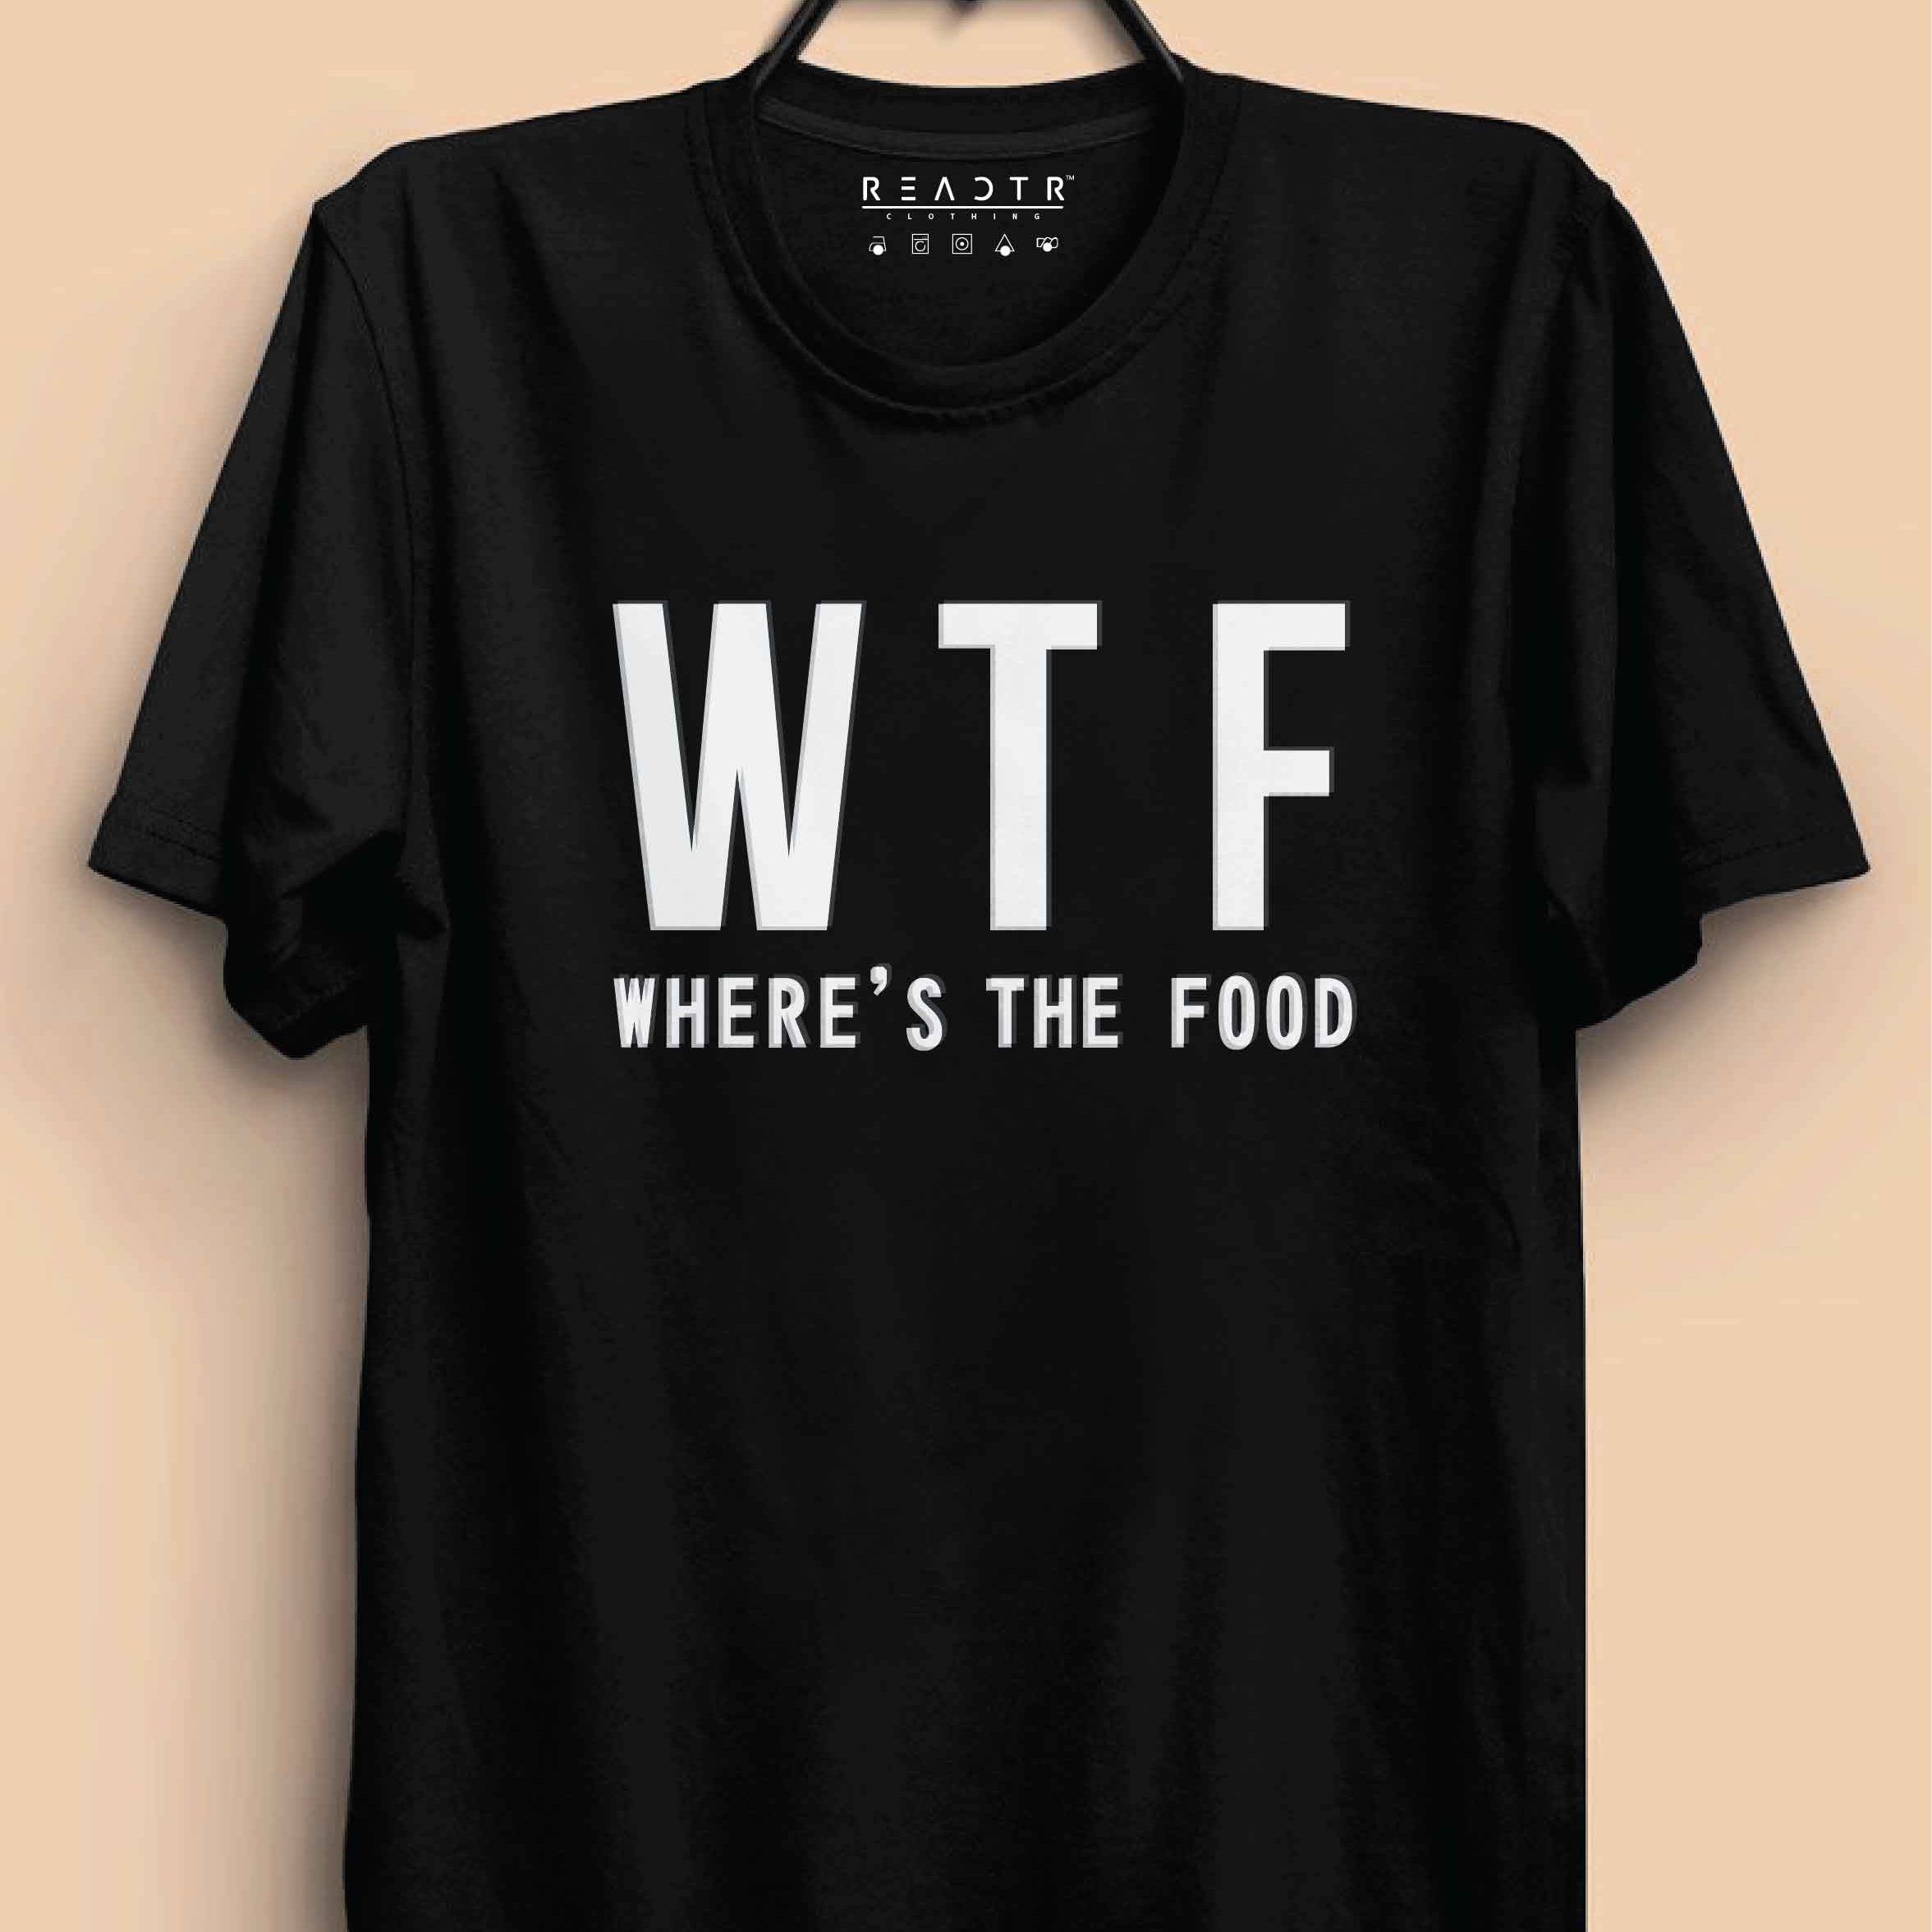 WTF- Where is the Food Reactr Tshirts For Men - Eyewearlabs